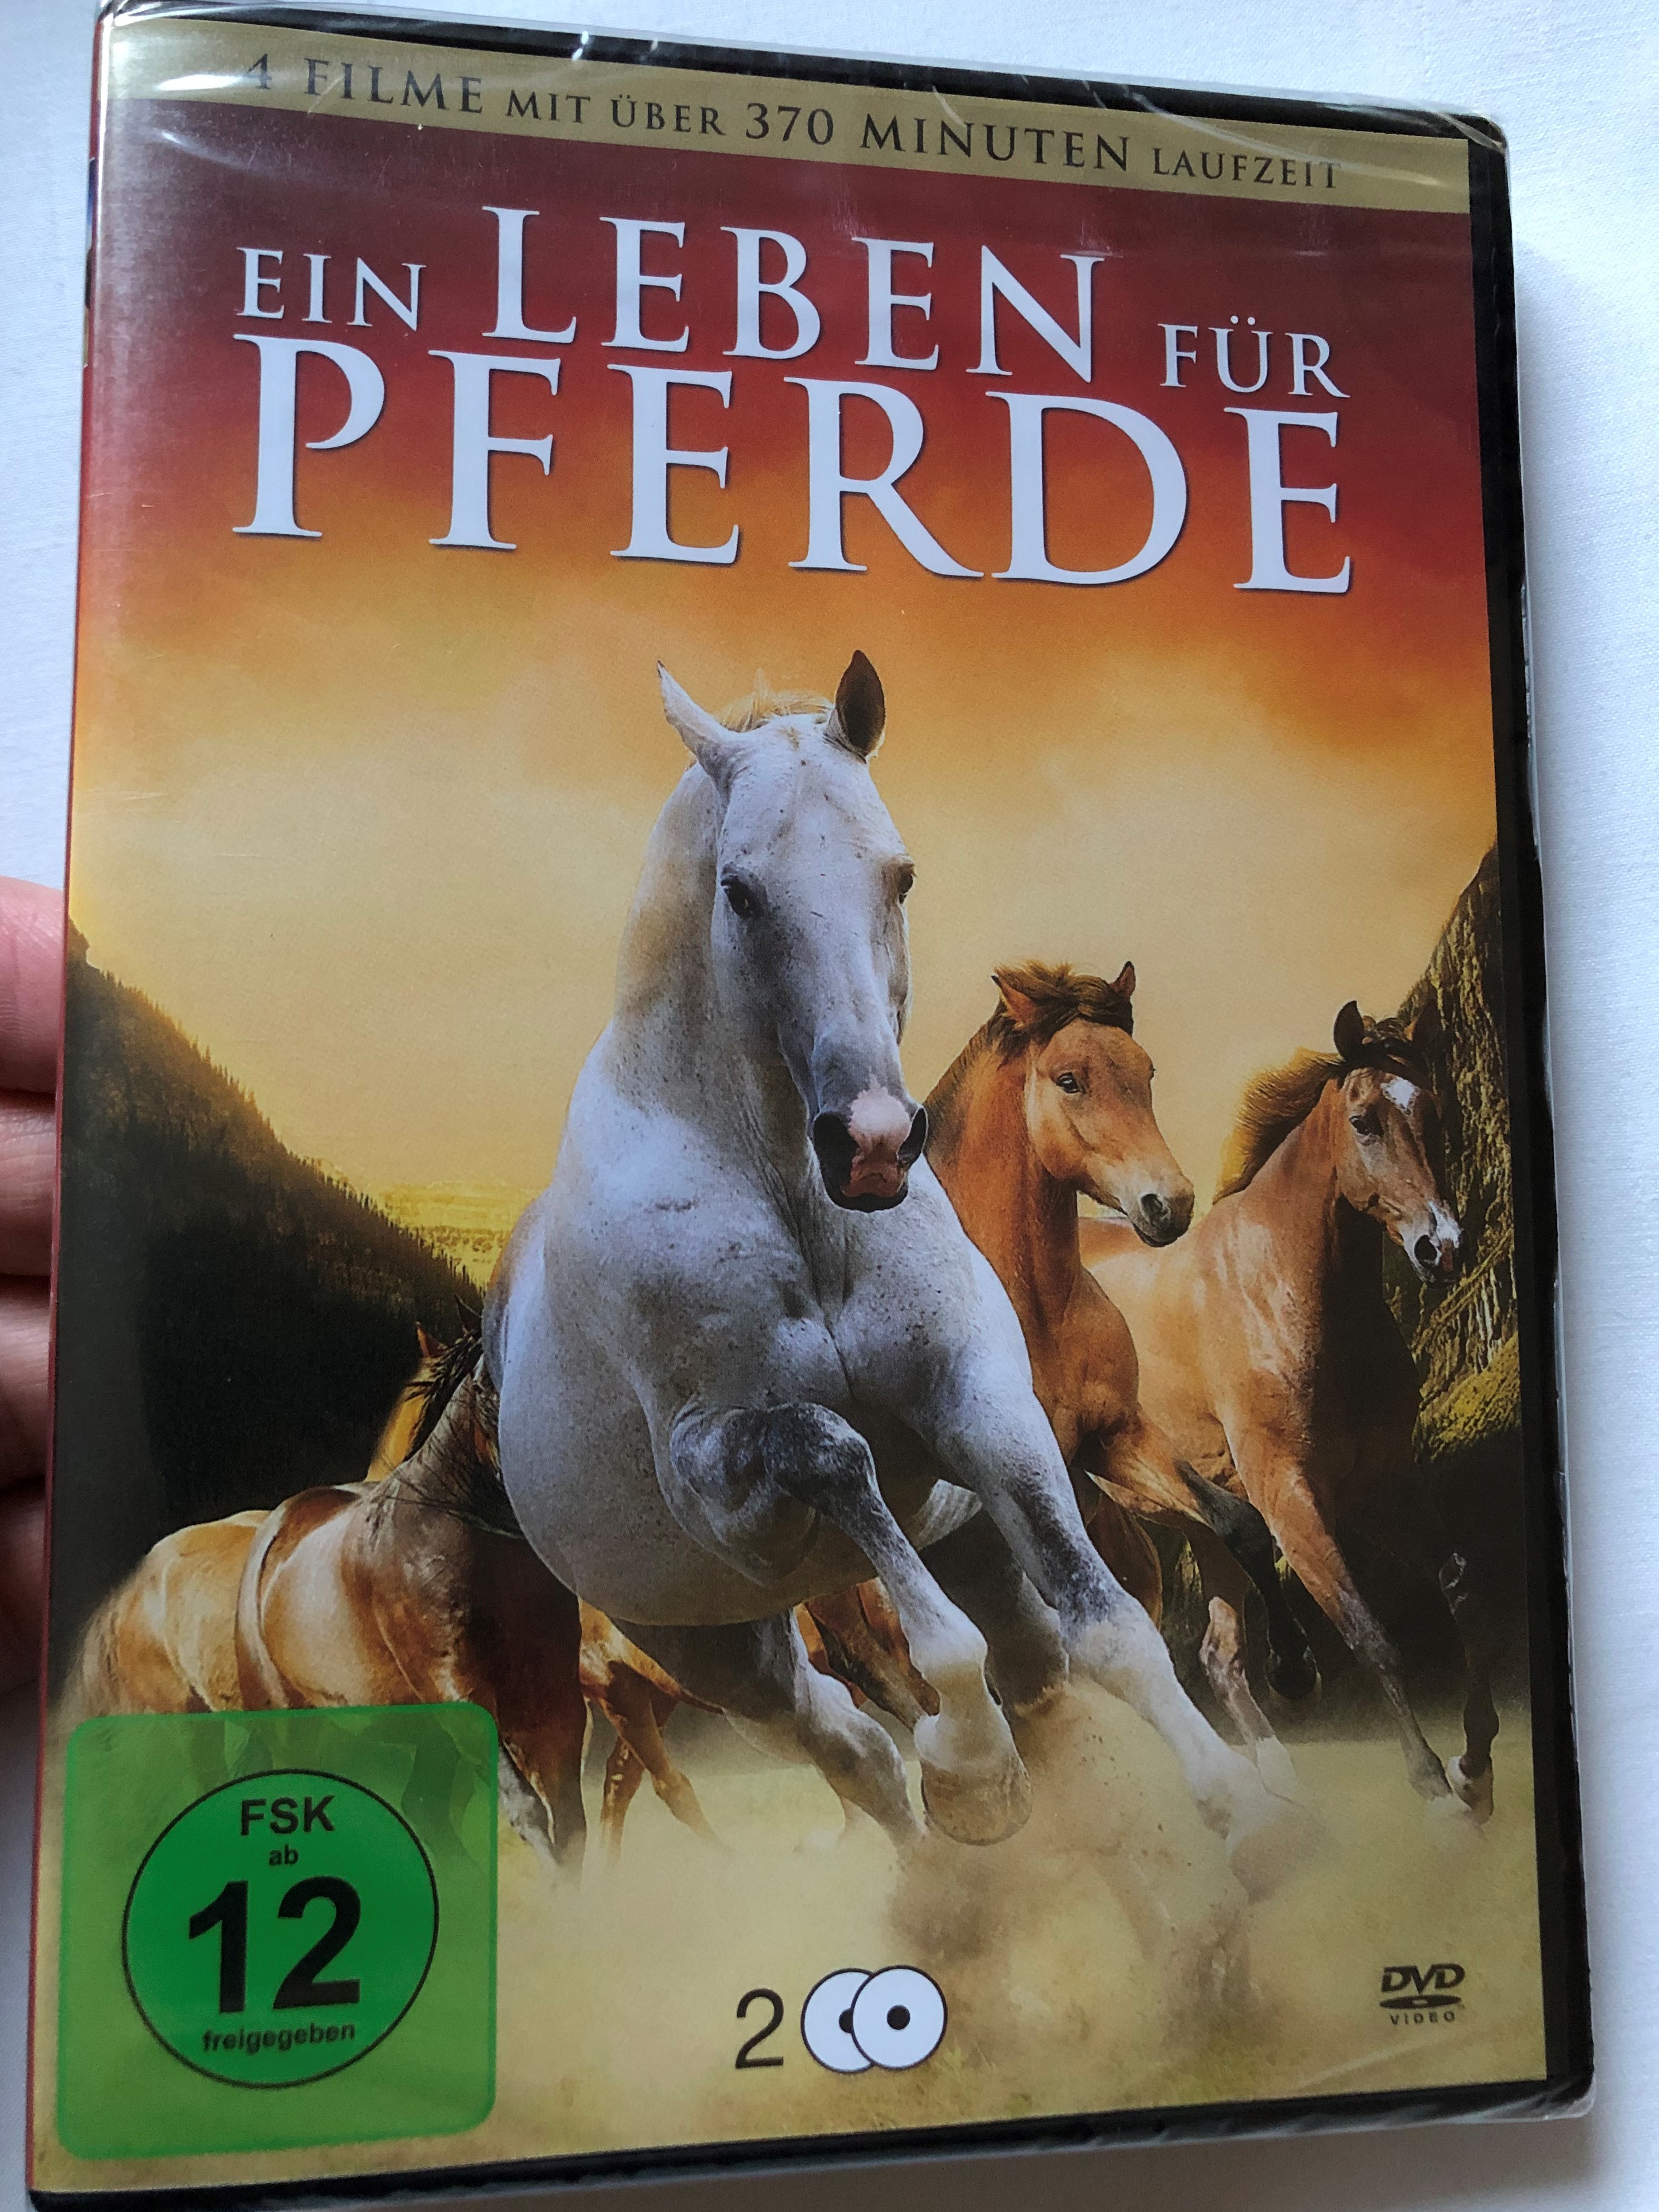 ein-leben-f-r-pferde-dvd-2016-a-life-for-horses-4-horse-themed-movies-with-over-370-minute-runtime-red-fury-the-white-stallion-bluegrass-horses-2-dvd-1-.jpg